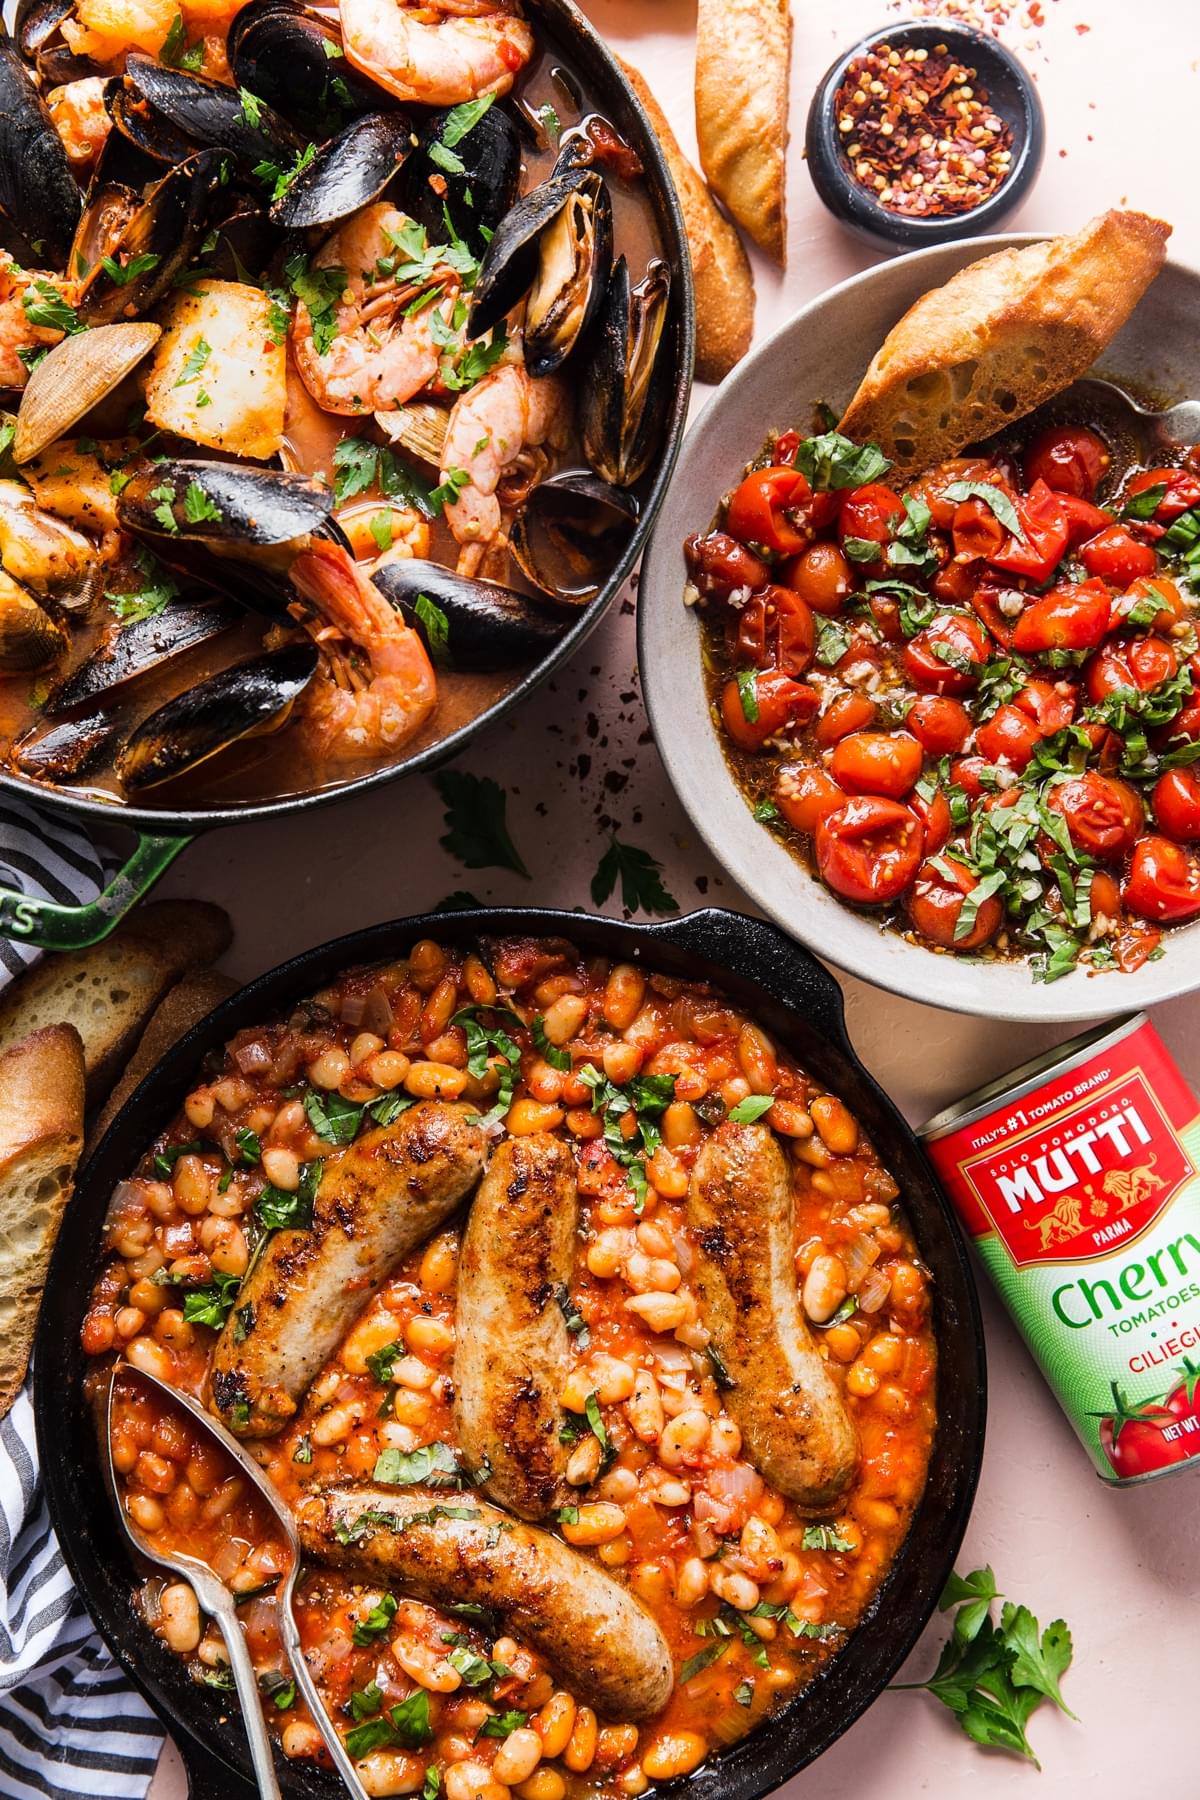 tomato Bruschetta, sausage Cassoulet and Cioppino with shrimp and muscles